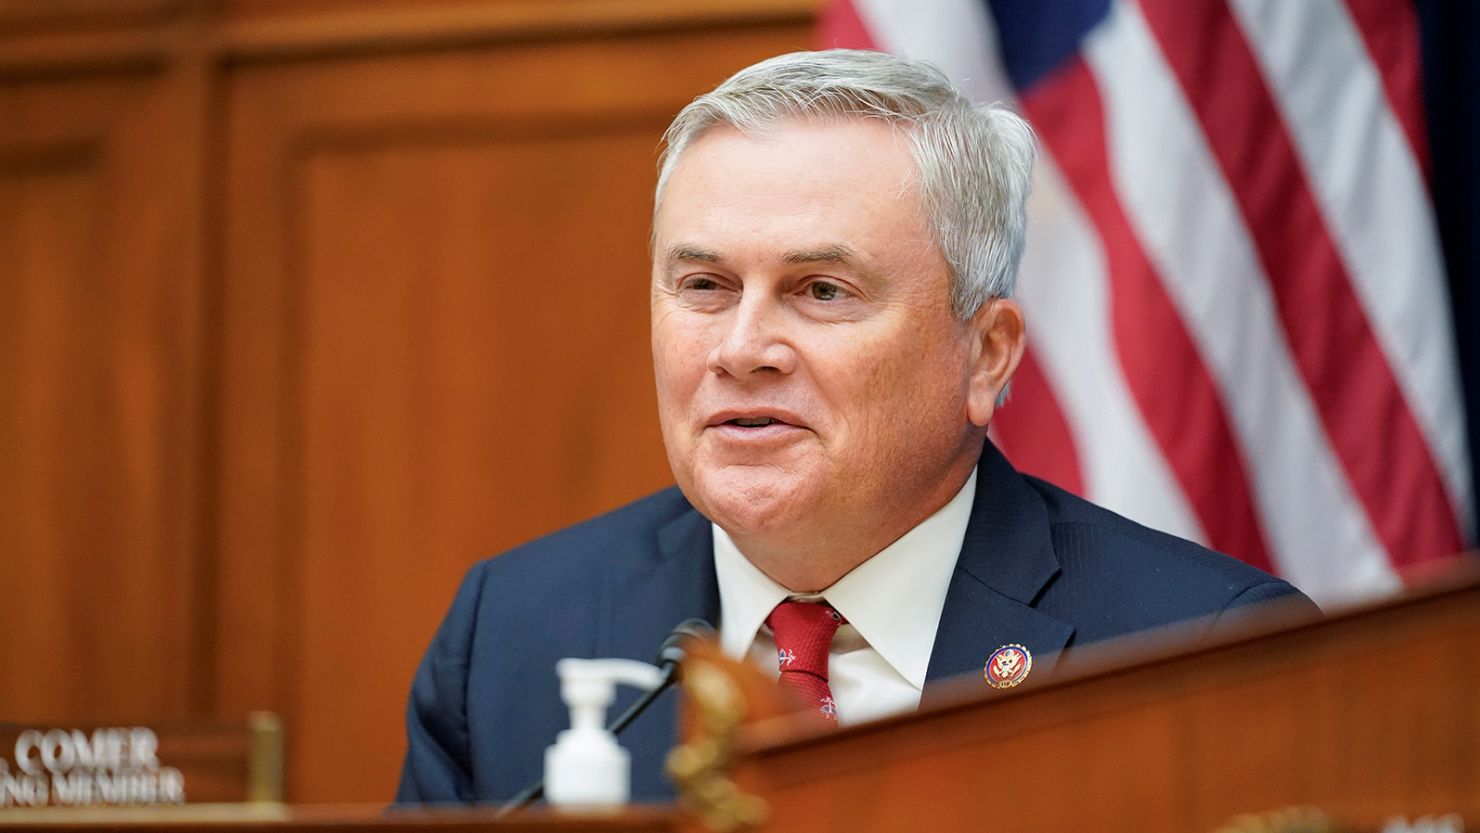 US Representative James Comer speaks during a House Committee on Oversight and Reform hearing on gun violence on Capitol Hill in Washington, DC on. June 8, 2022. 